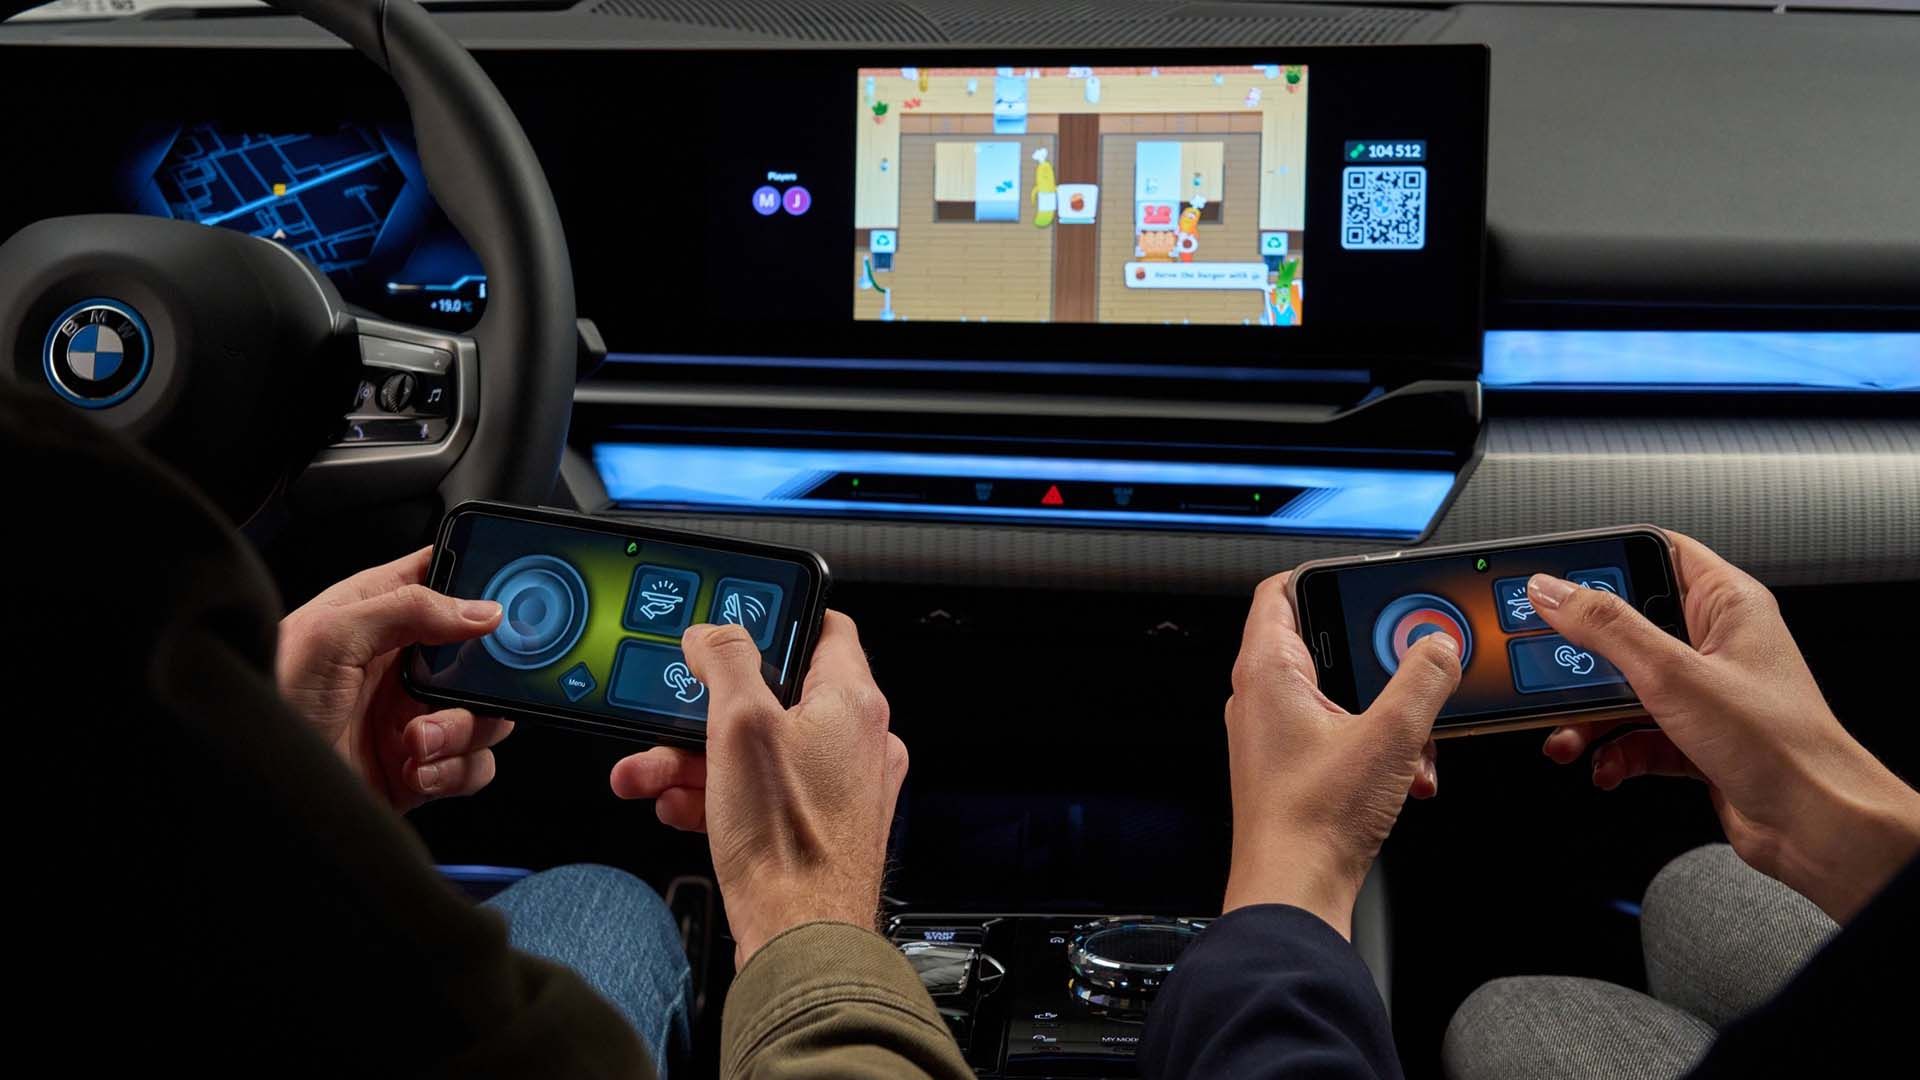 BMW i5 interior dashboard showing AirConsole in-car gaming